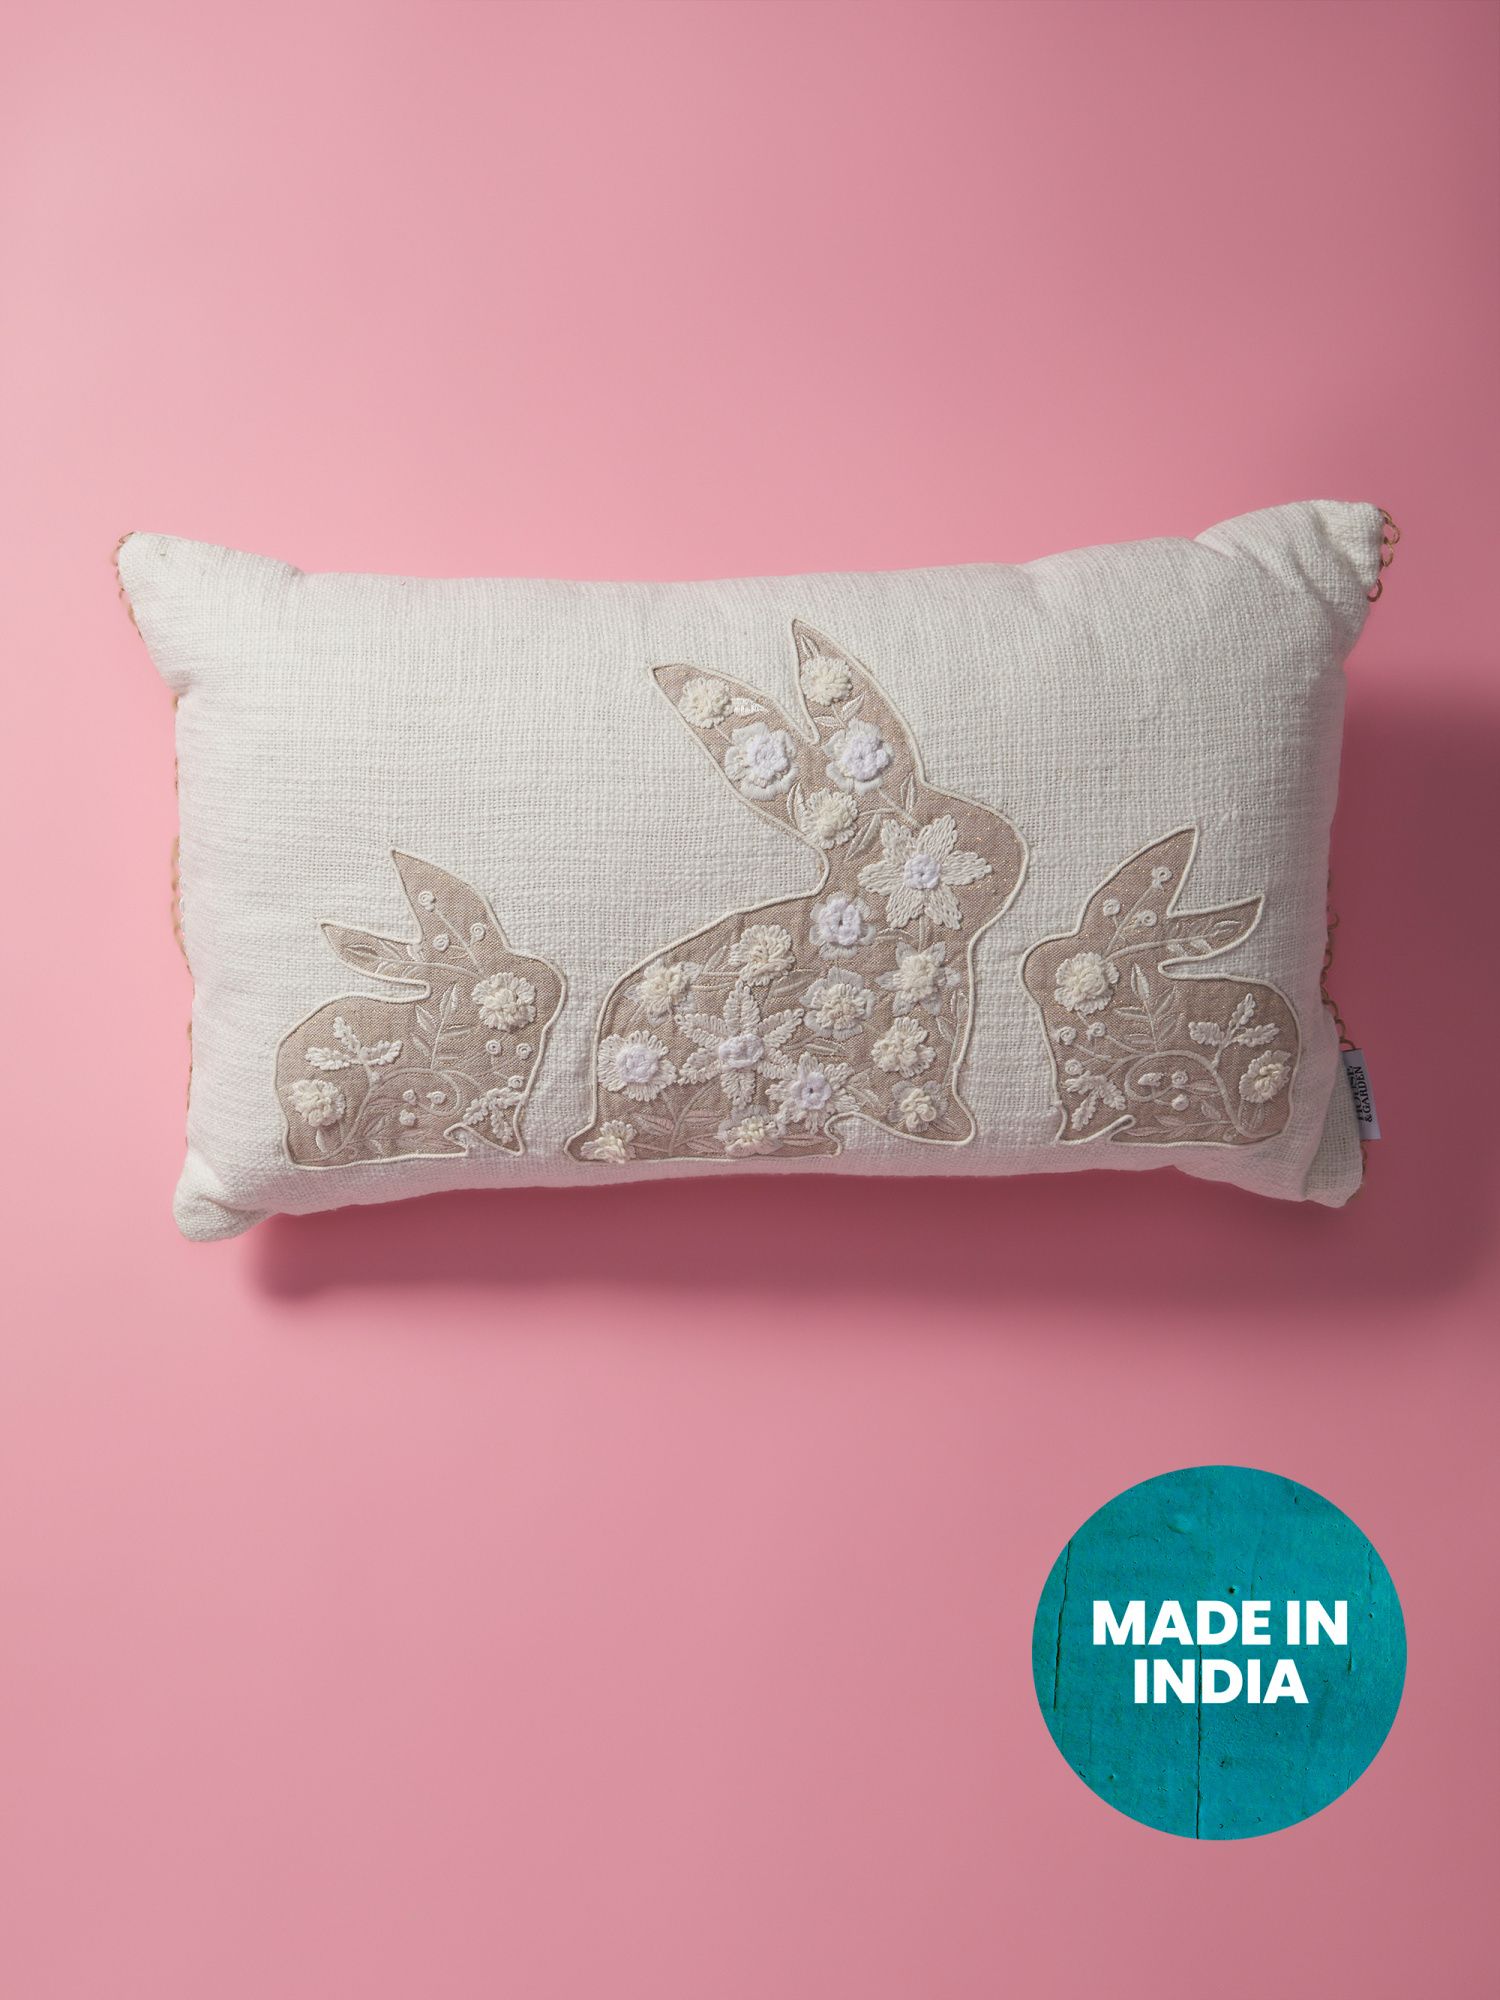 Made In India 14x24 Floral Bunny Embroidered Pillow | Pillows & Throws | HomeGoods | HomeGoods